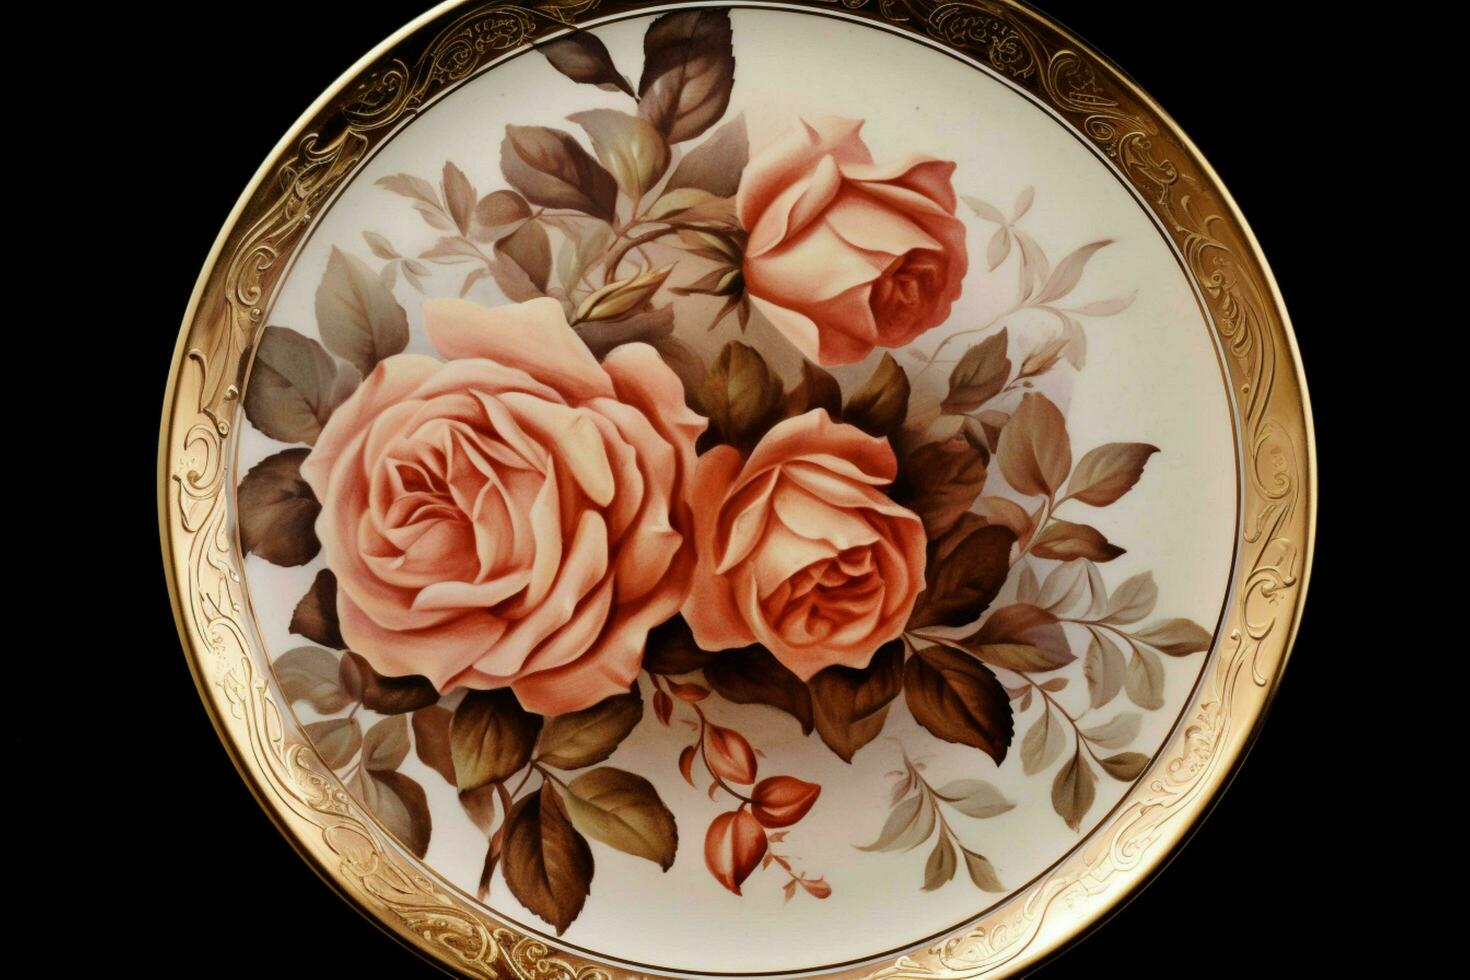 a round plate with roses on it and a gold rim photo